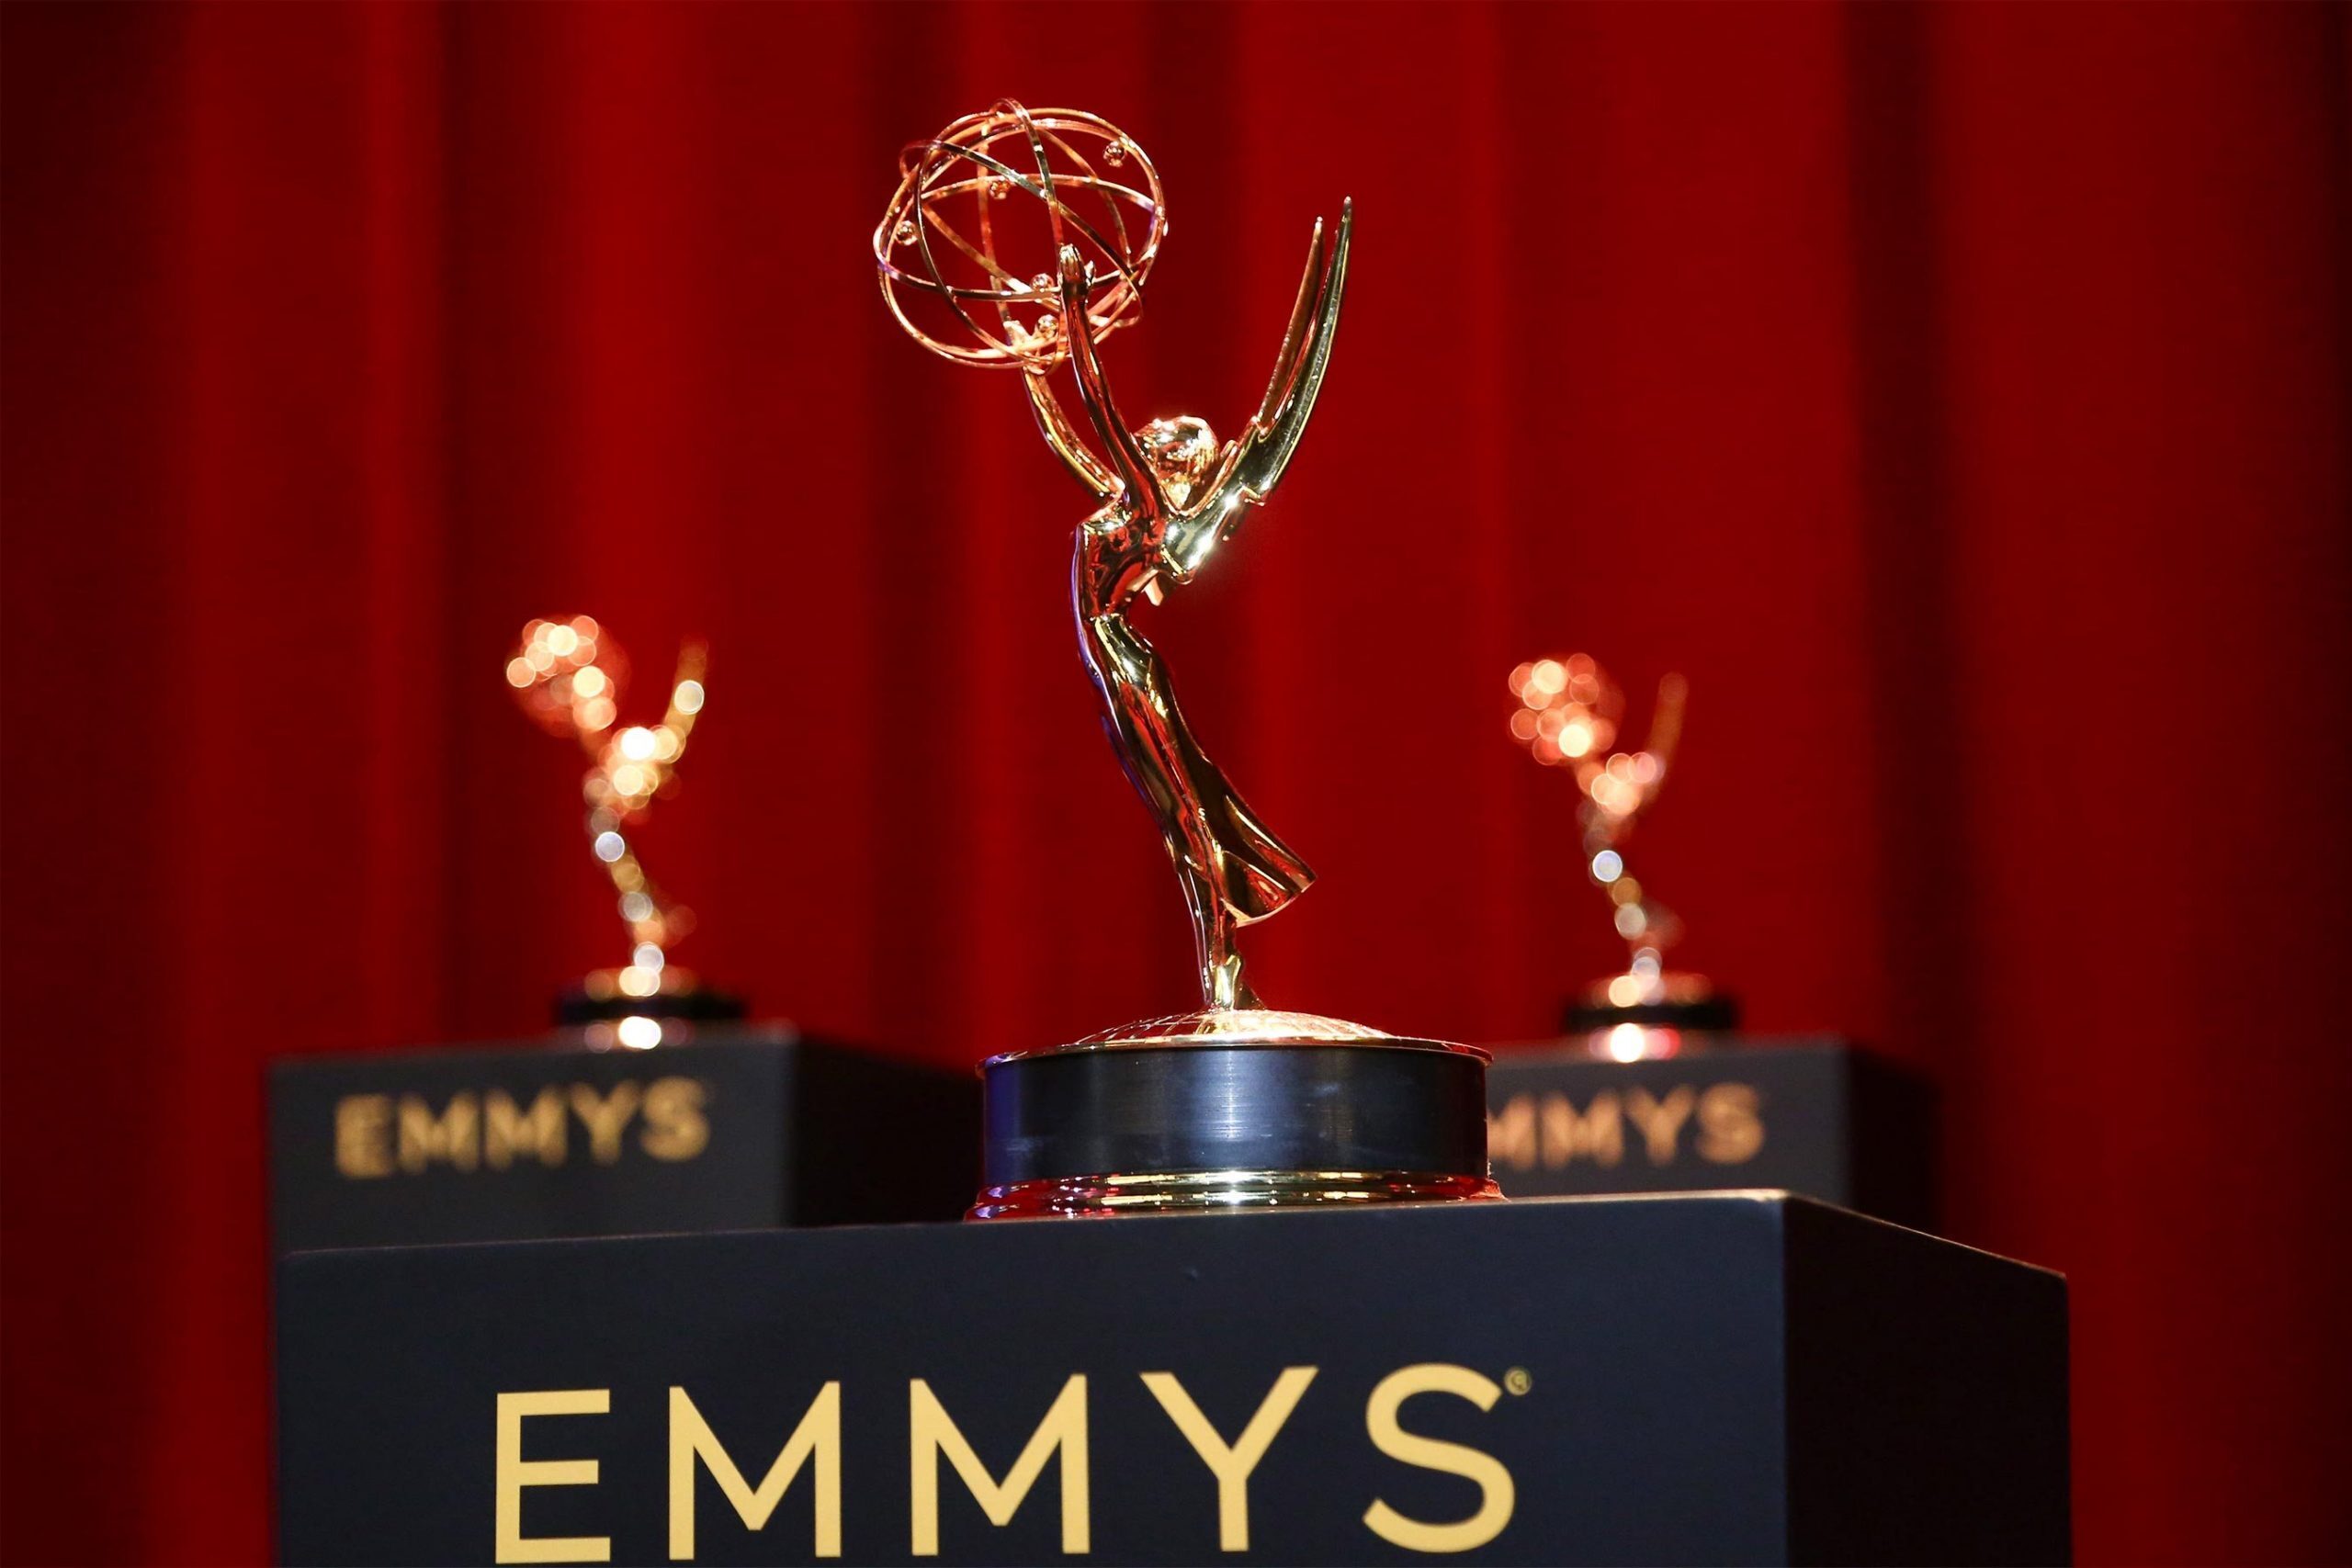 The National Academy of Television Arts & Sciences recently announced the new Sports Emmy award for Outstanding Esports Coverage (Photo by Tommaso Boddi)